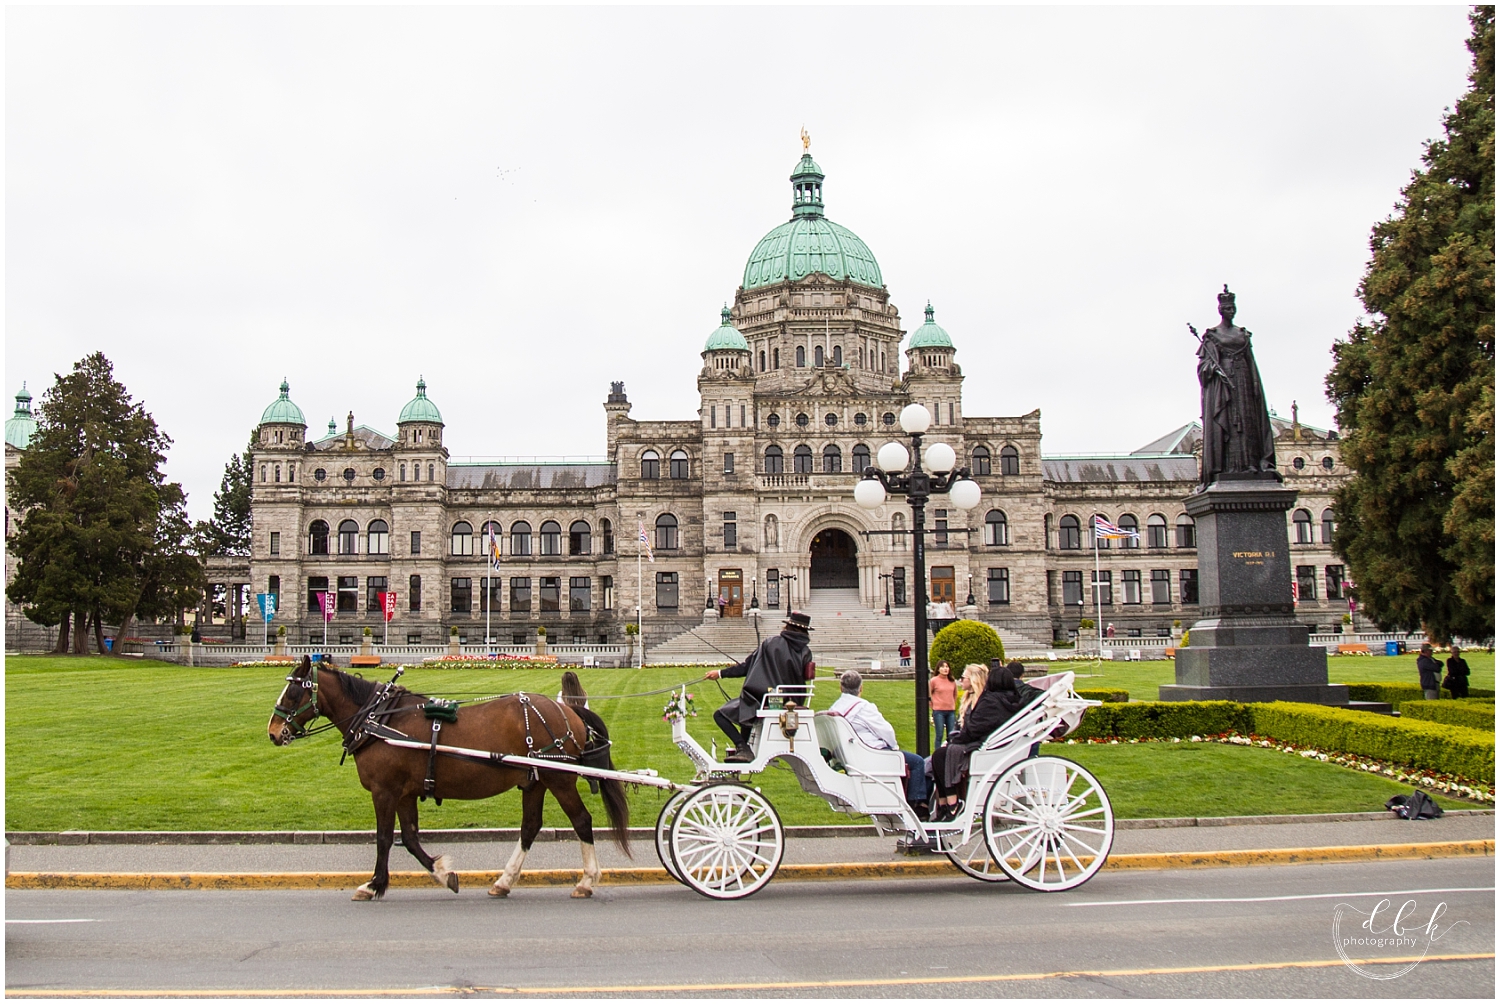 horse-drawn carriage passing the old British Columbia Parliament building in Victoria, BC